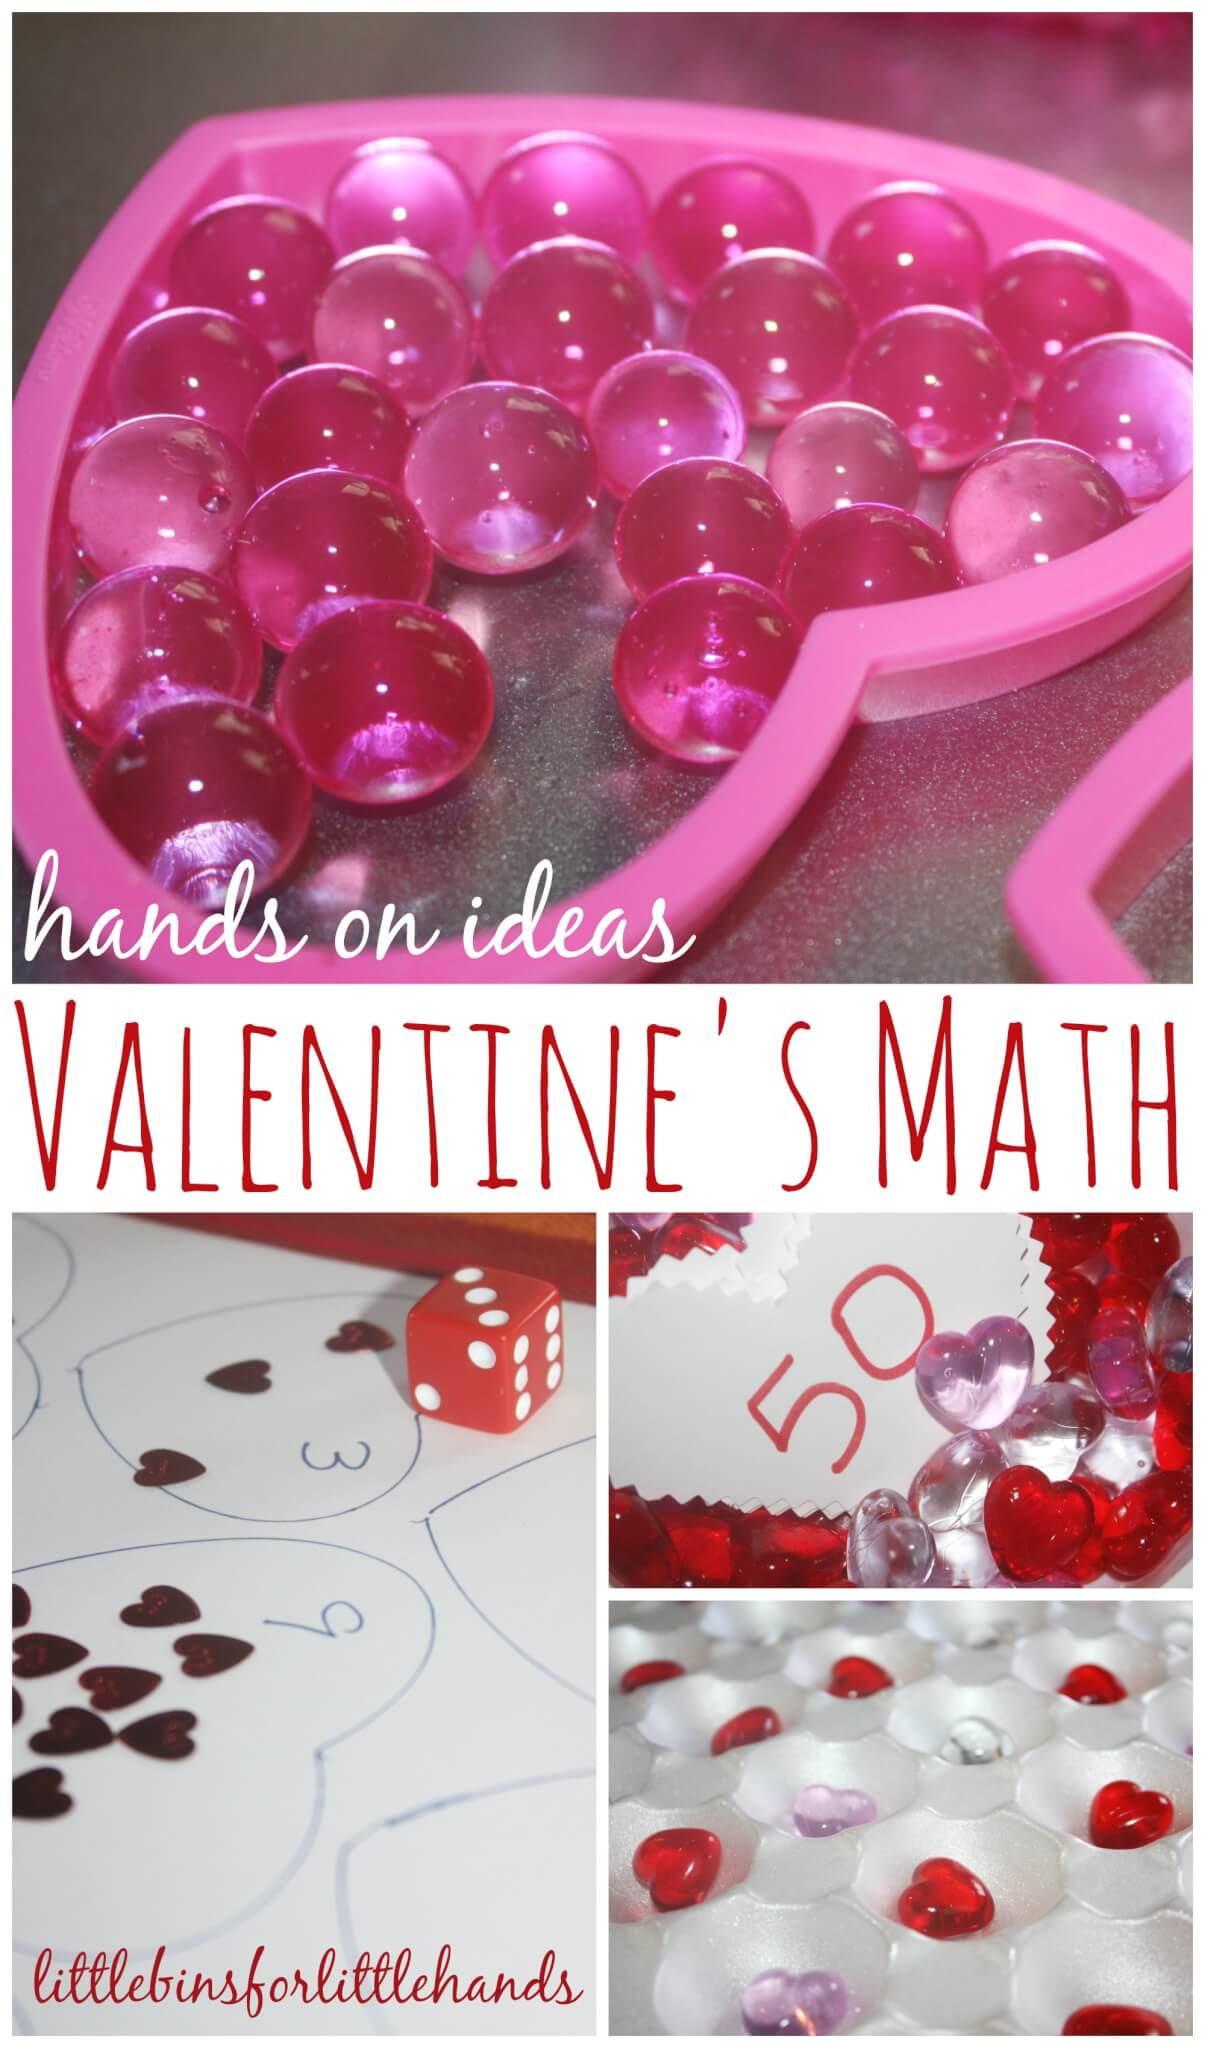 Valentines Day Ideas For Preschoolers
 Valentines Preschool Activities for Early Learning